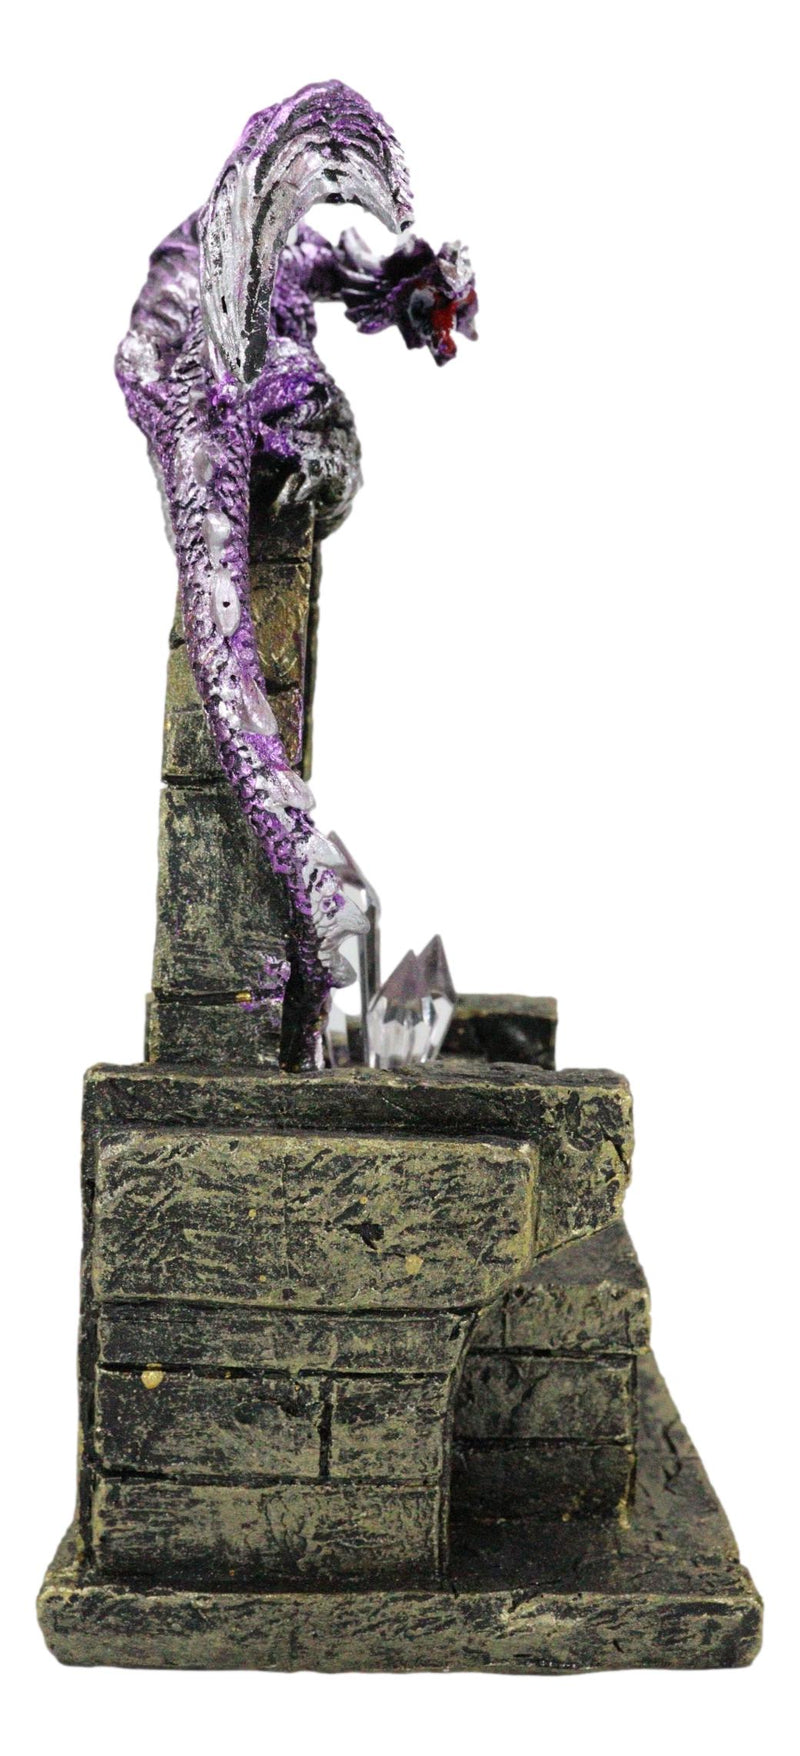 Medieval Purple Dragon On King's Landing Throne With LED Crystals Figurine